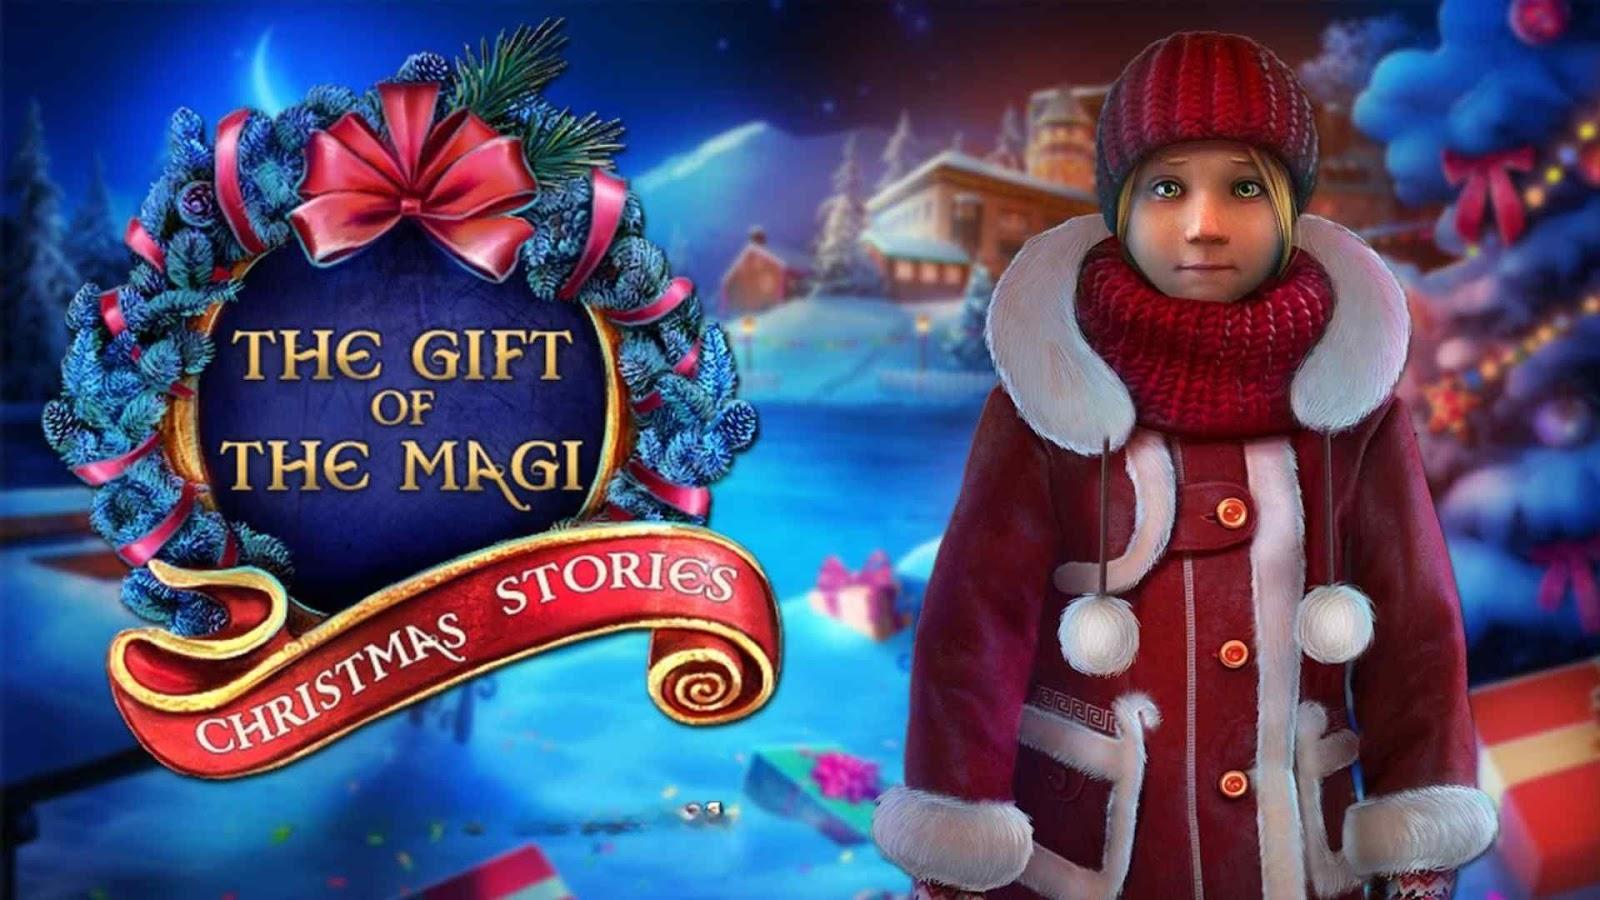 Christmas Stories: The Gift of the Magi